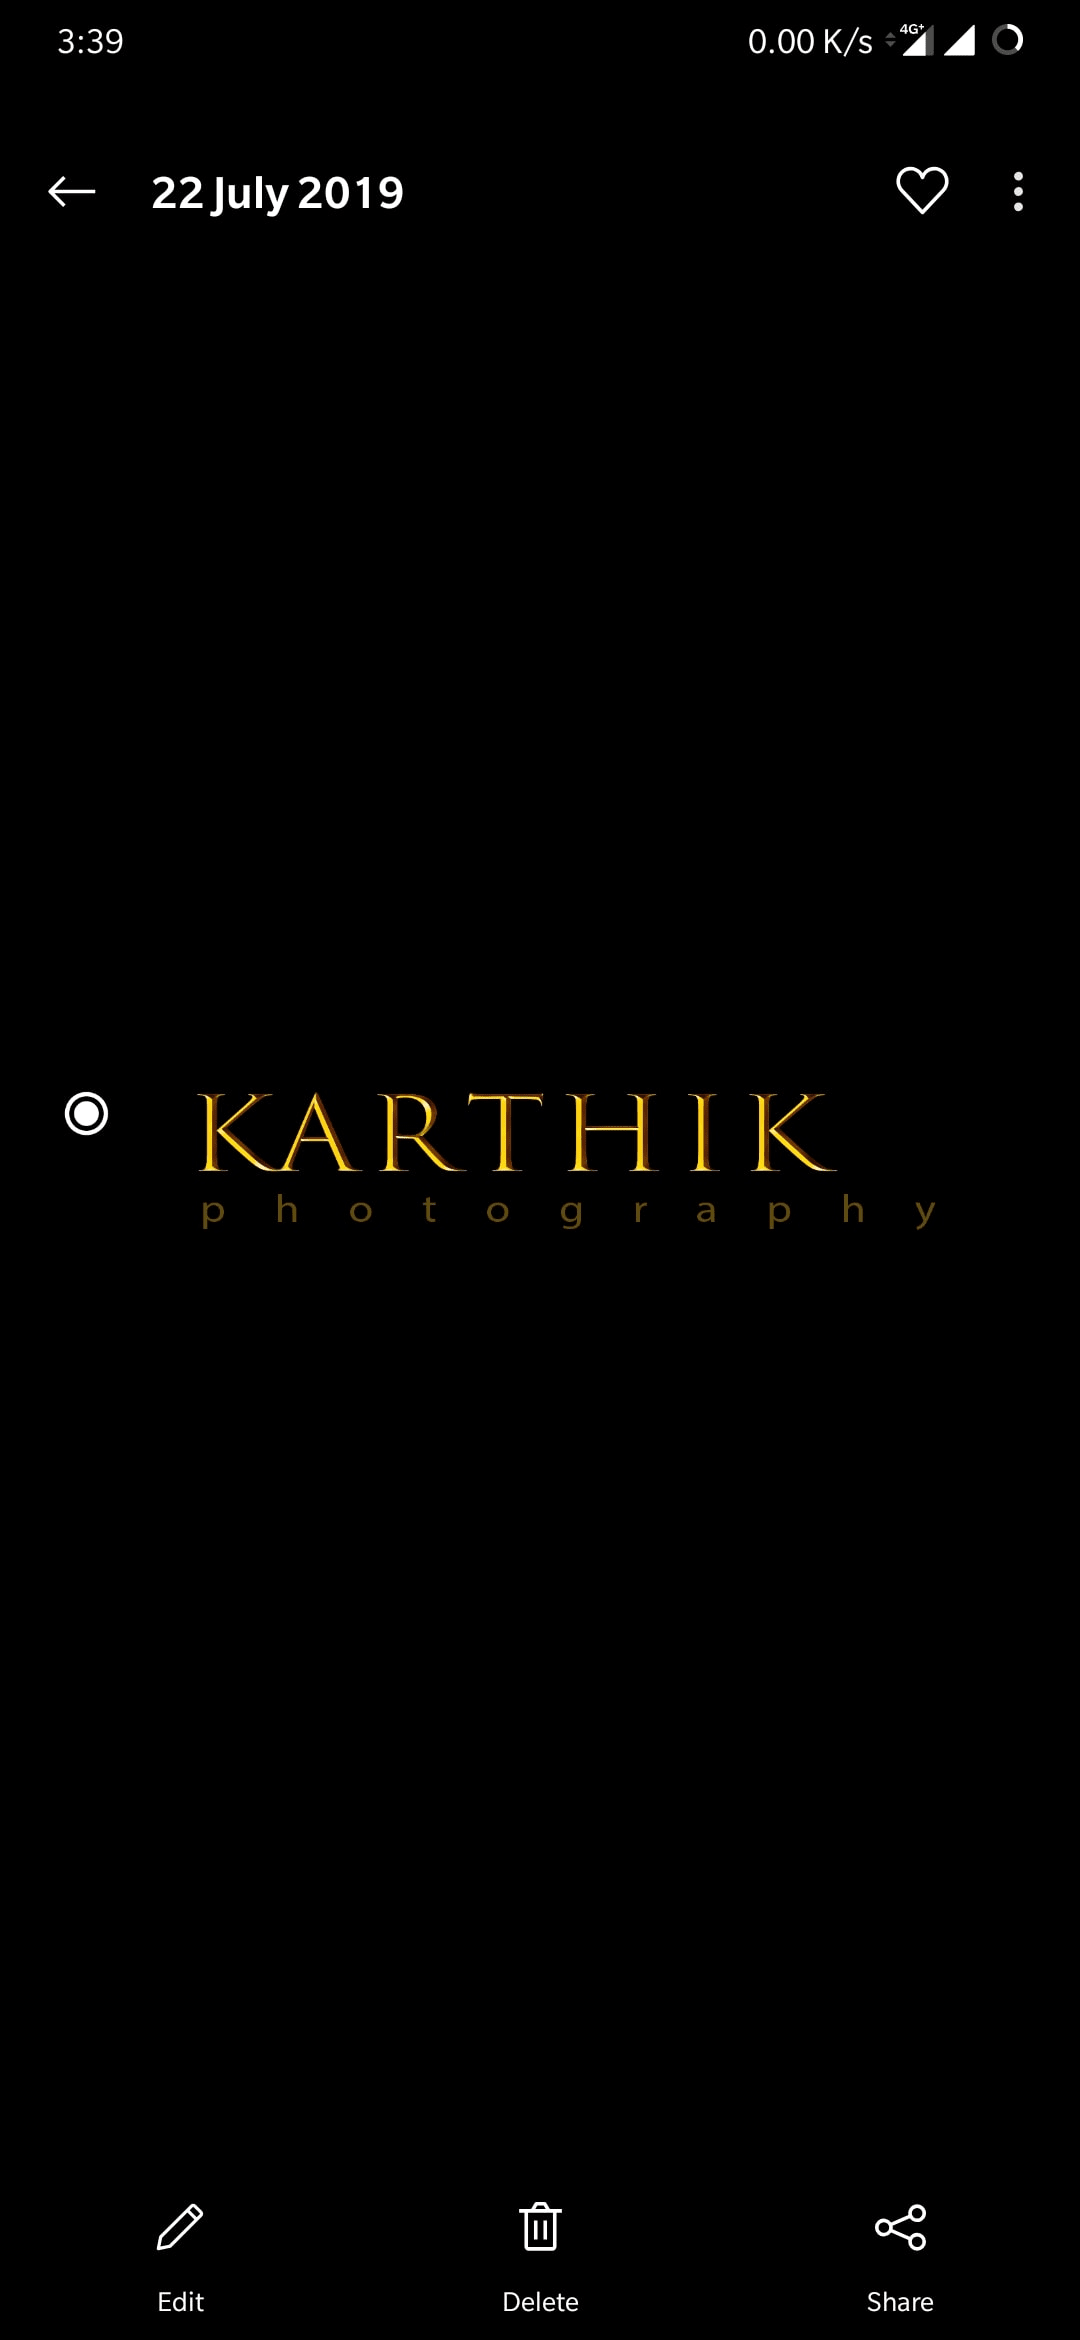 karthik name in different styles